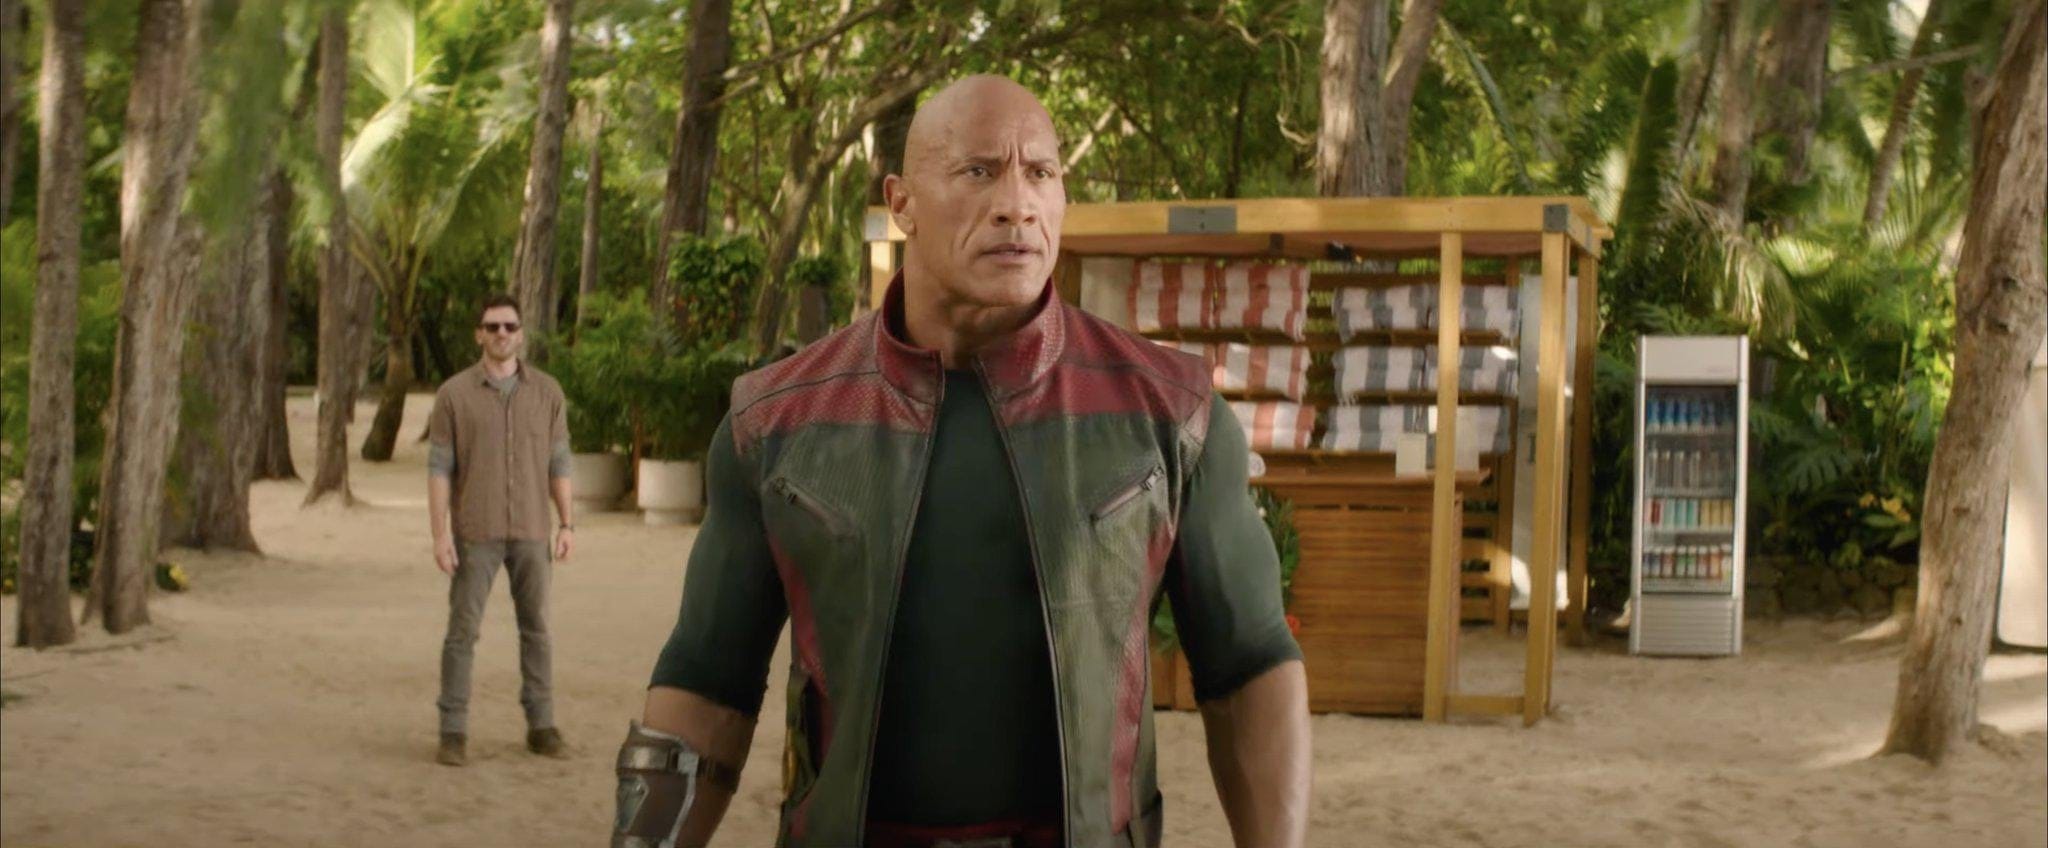 Dwayne Johnson and Chris Evans Team Up to Save Christmas in Red One Trailer